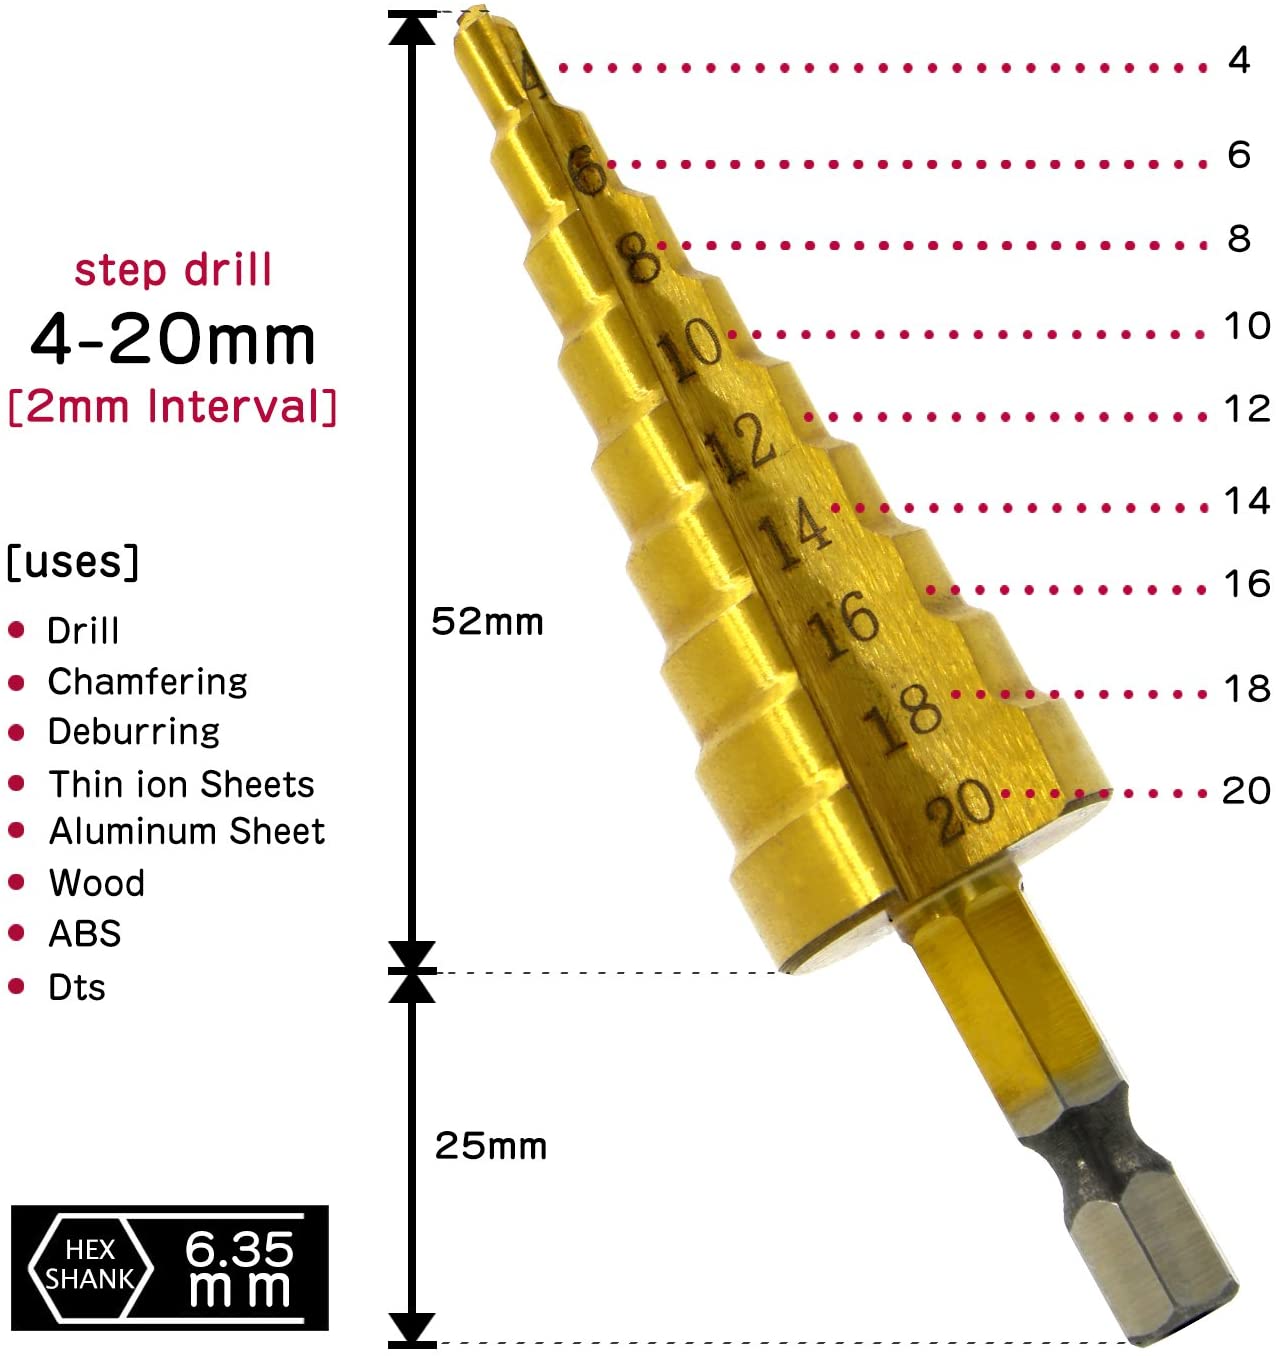 Set Of 3 Staggered Countersink Drill Bit, Hss Stainless Steel, Titanium Conical Triangle, With Hexagonal Shank, For Screwdriver Drilling On Steel, Brass, Wood, Plastic - image 3 of 7